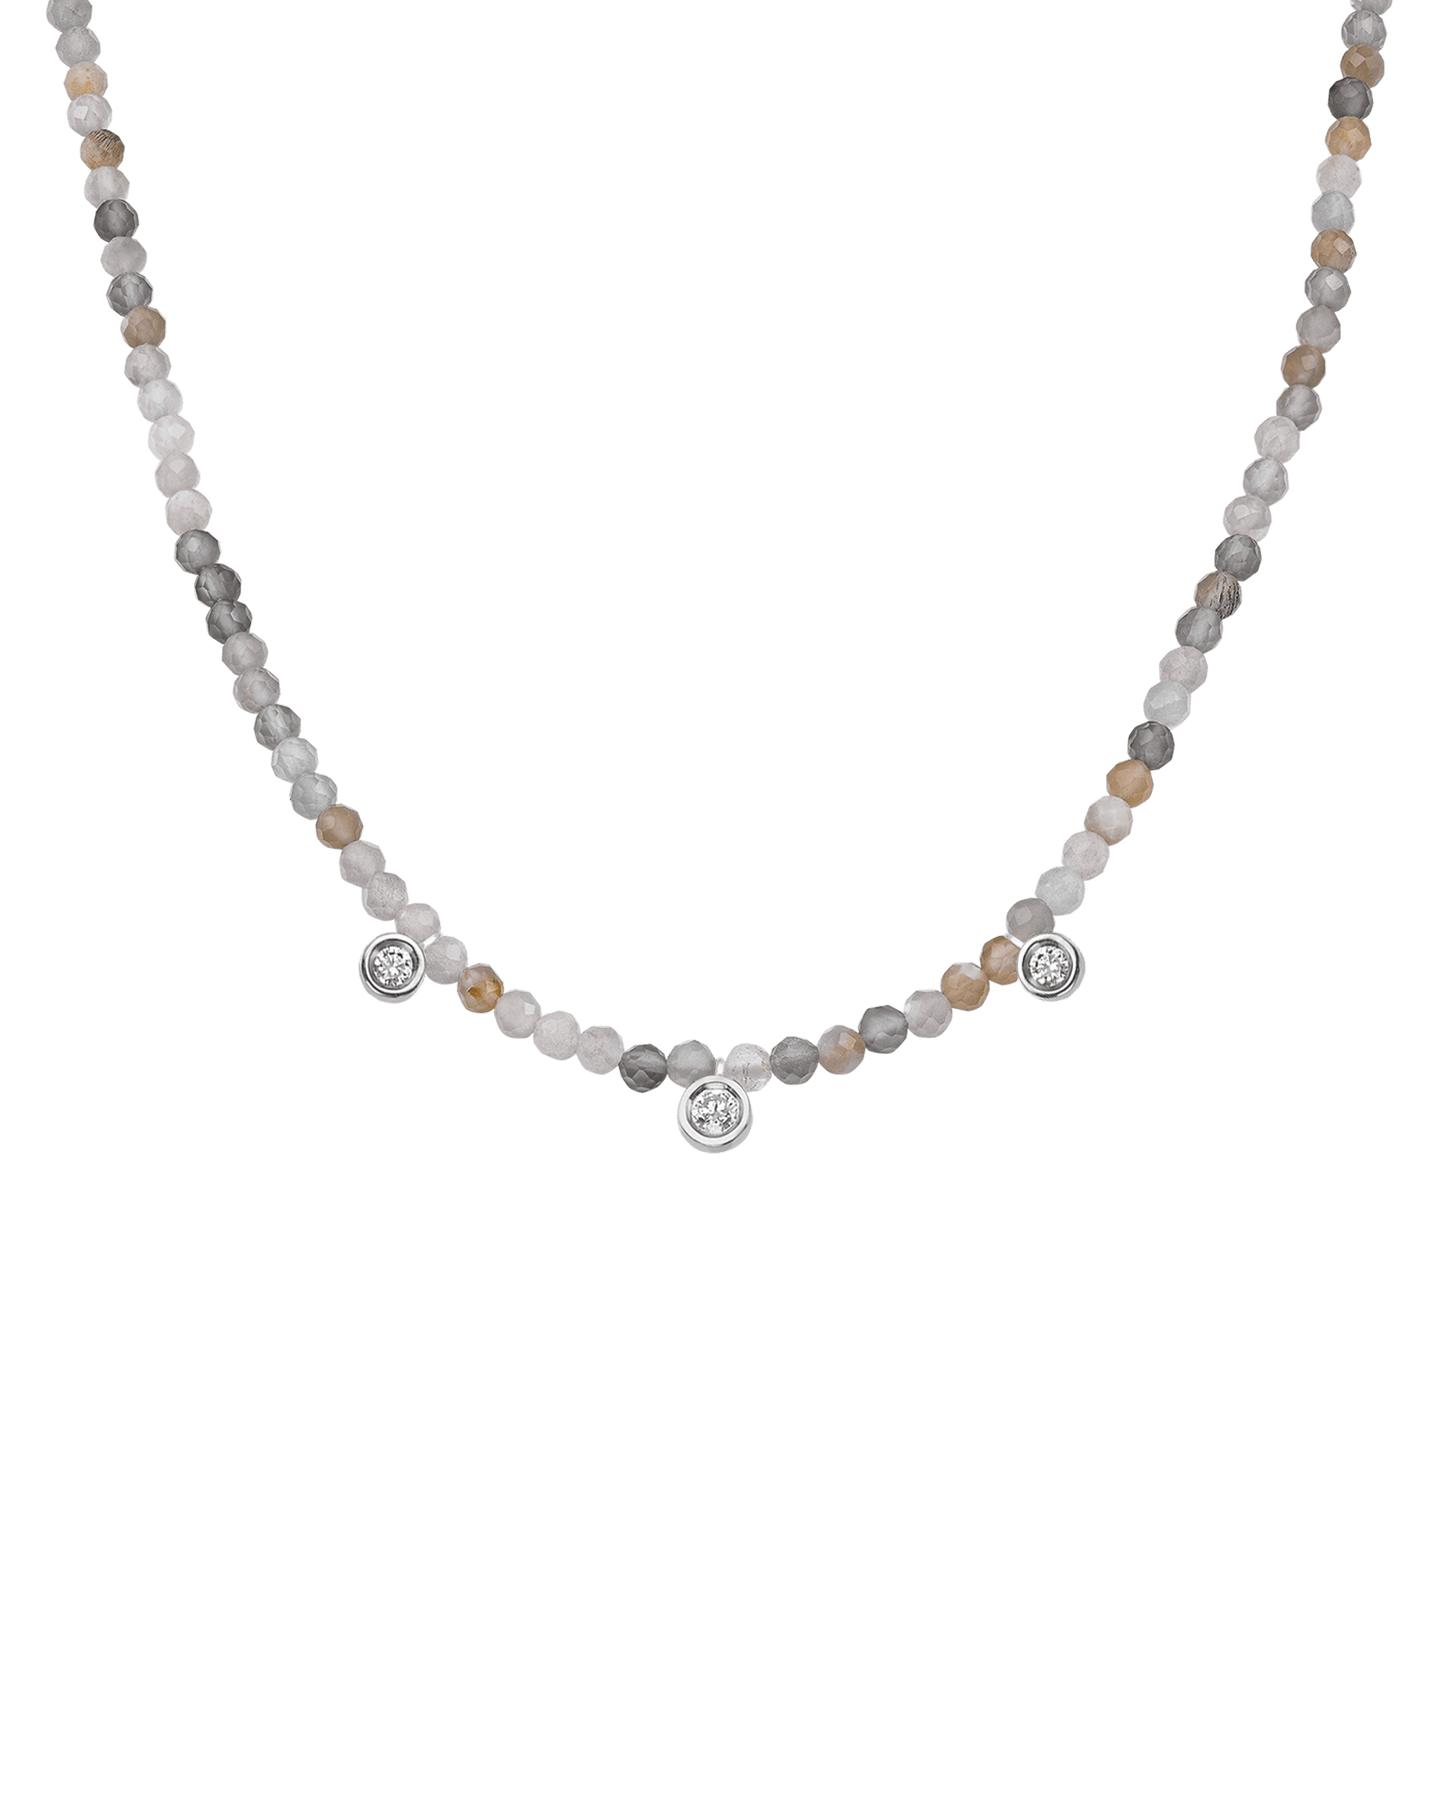 Emerald Gemstone & Three diamonds Necklace - 14K White Gold Necklaces magal-dev Natural Moonstone 14" - Collar 